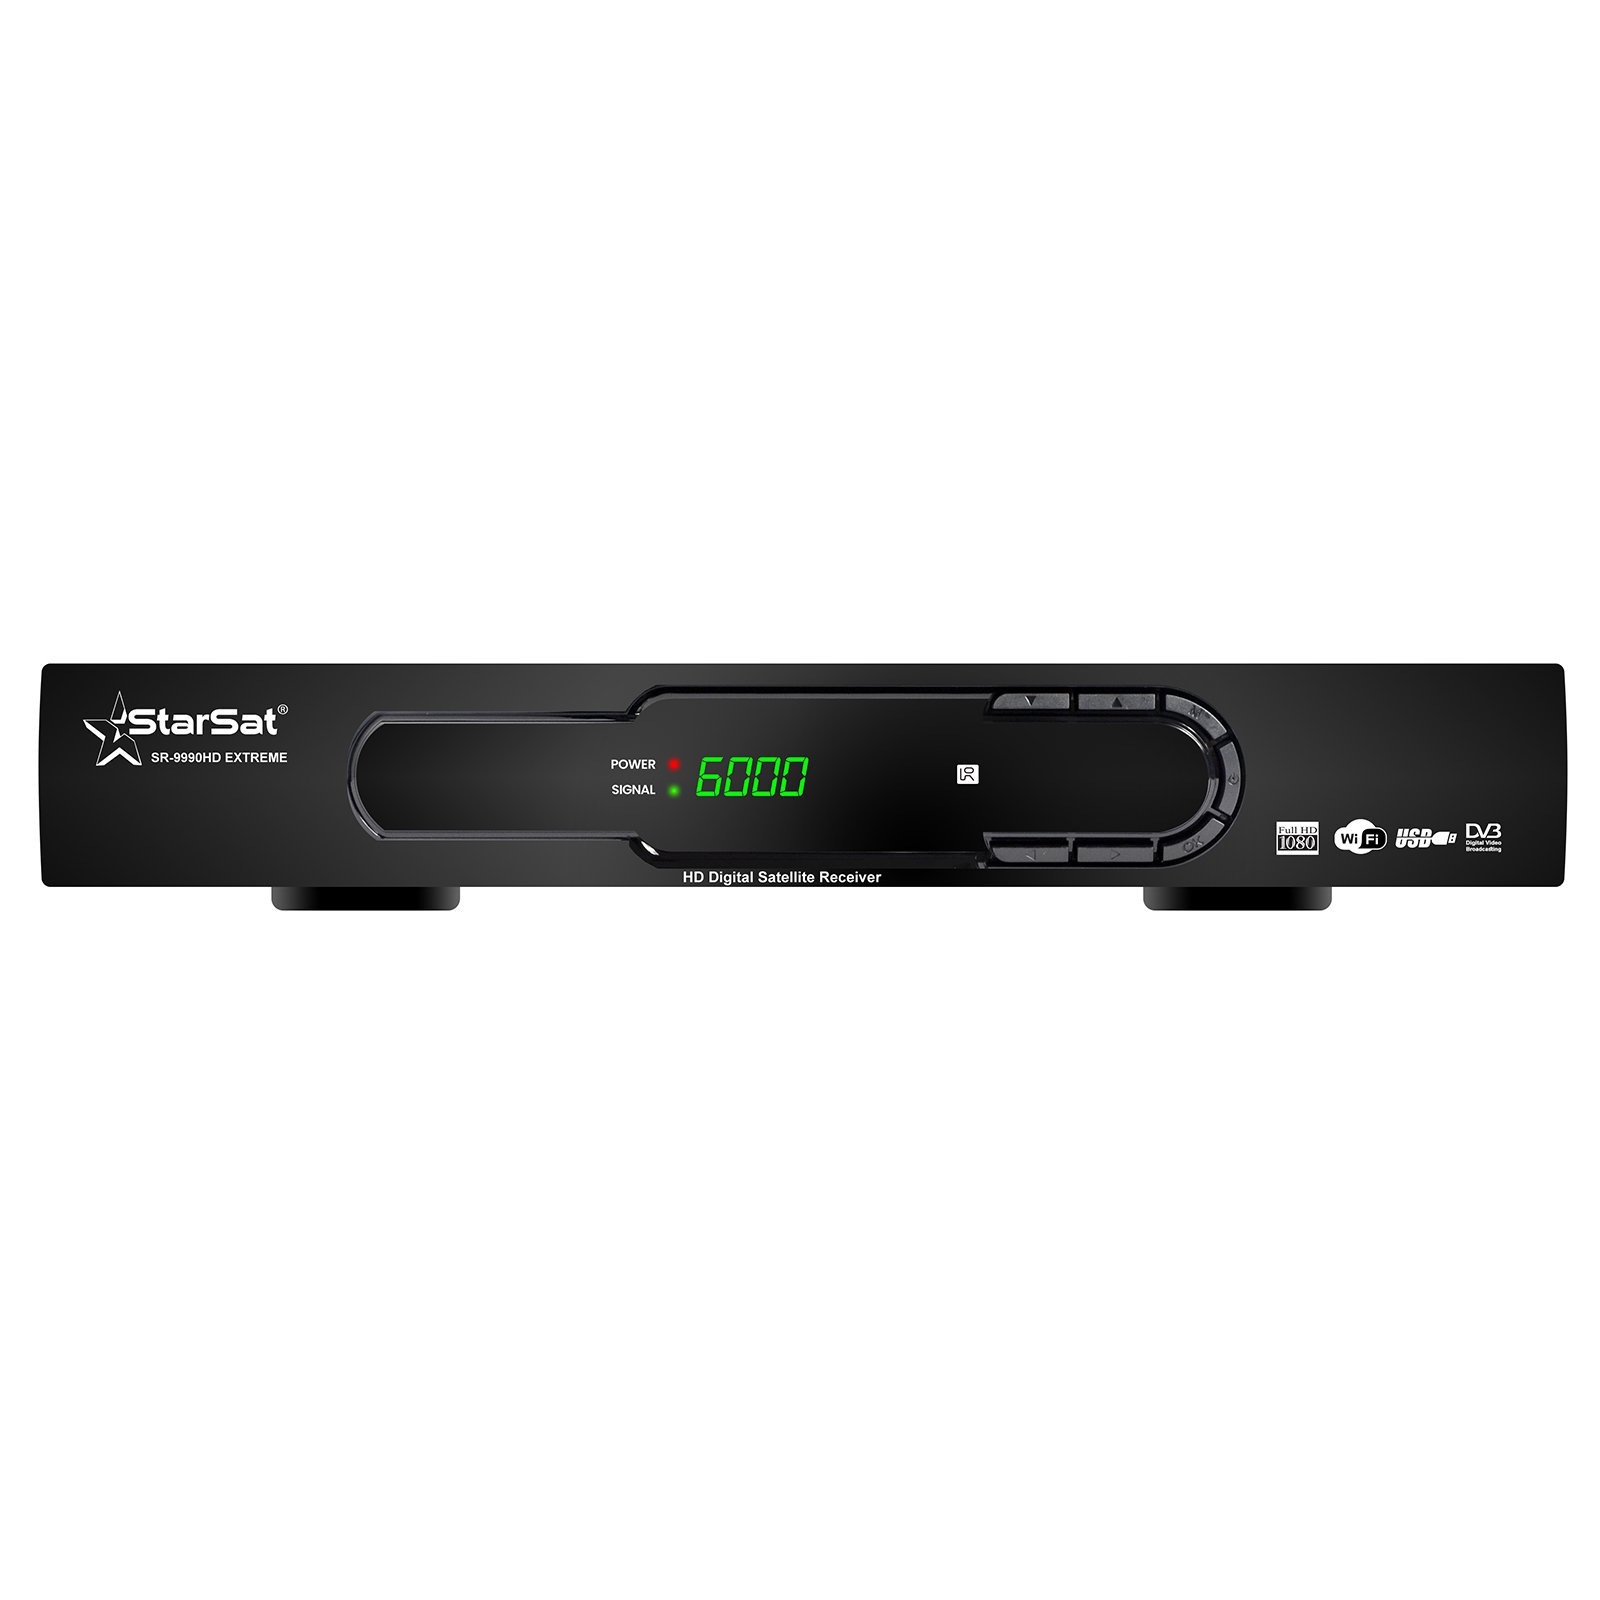 StarSat SR-9990HD Extreme Full HD, 2xUSB, HDMI, 8000 Channels, EPG, MPEG4, Blind Scan, YouTube, PVR, DVBS2, WiFi Supported (WiFi device not include)